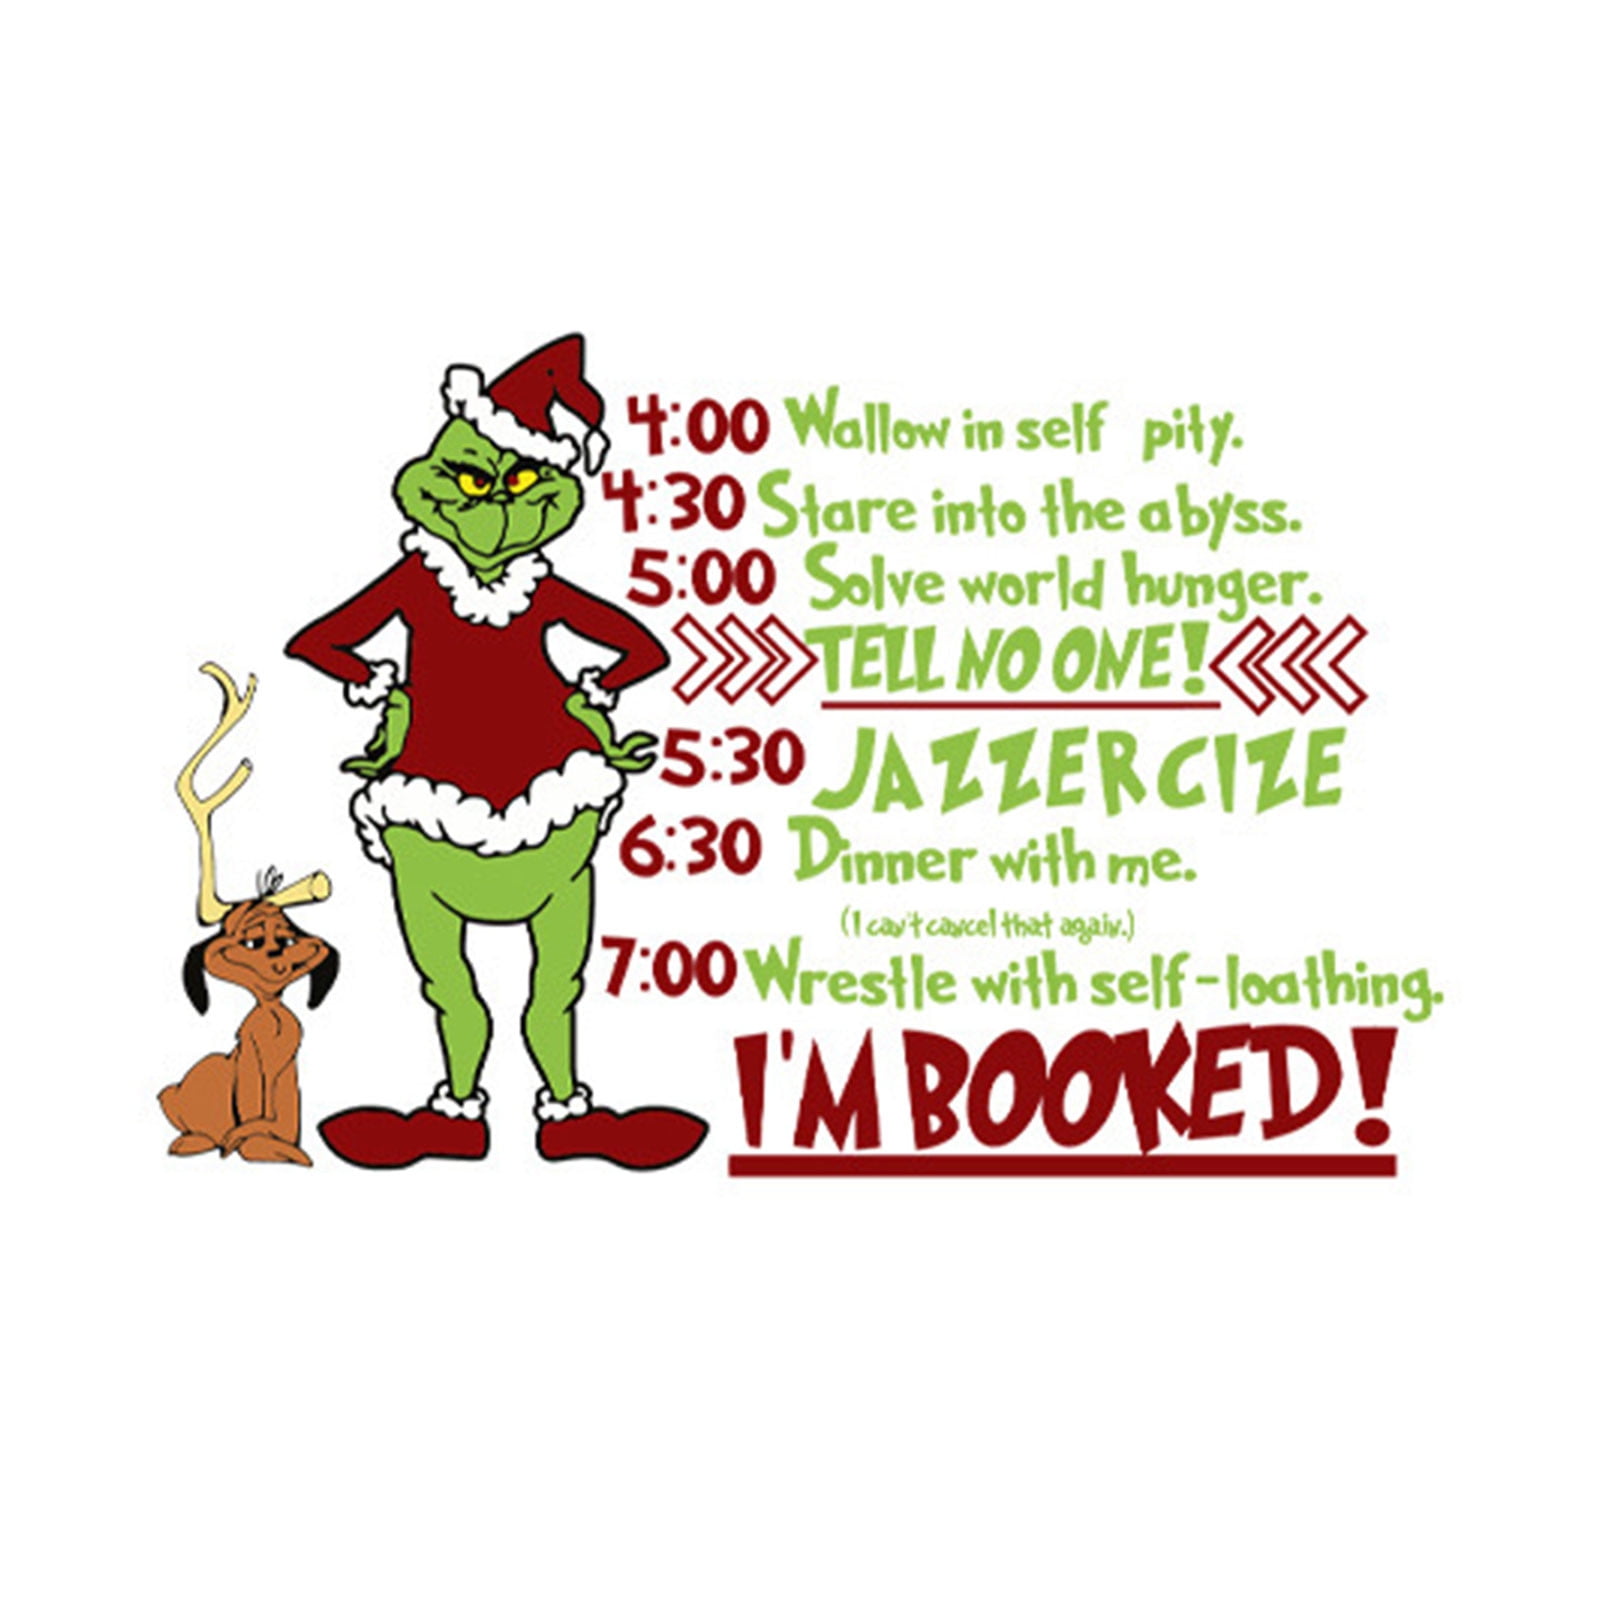 Yubatuo Green Monster Christmas Grinch Iron on Transfer Heat Transfer Design  Sticker Iron on Vinyl Patches Iron on Transfer Paper for Clothing Hat  Pillow Backpack Diy Craft Supplies 